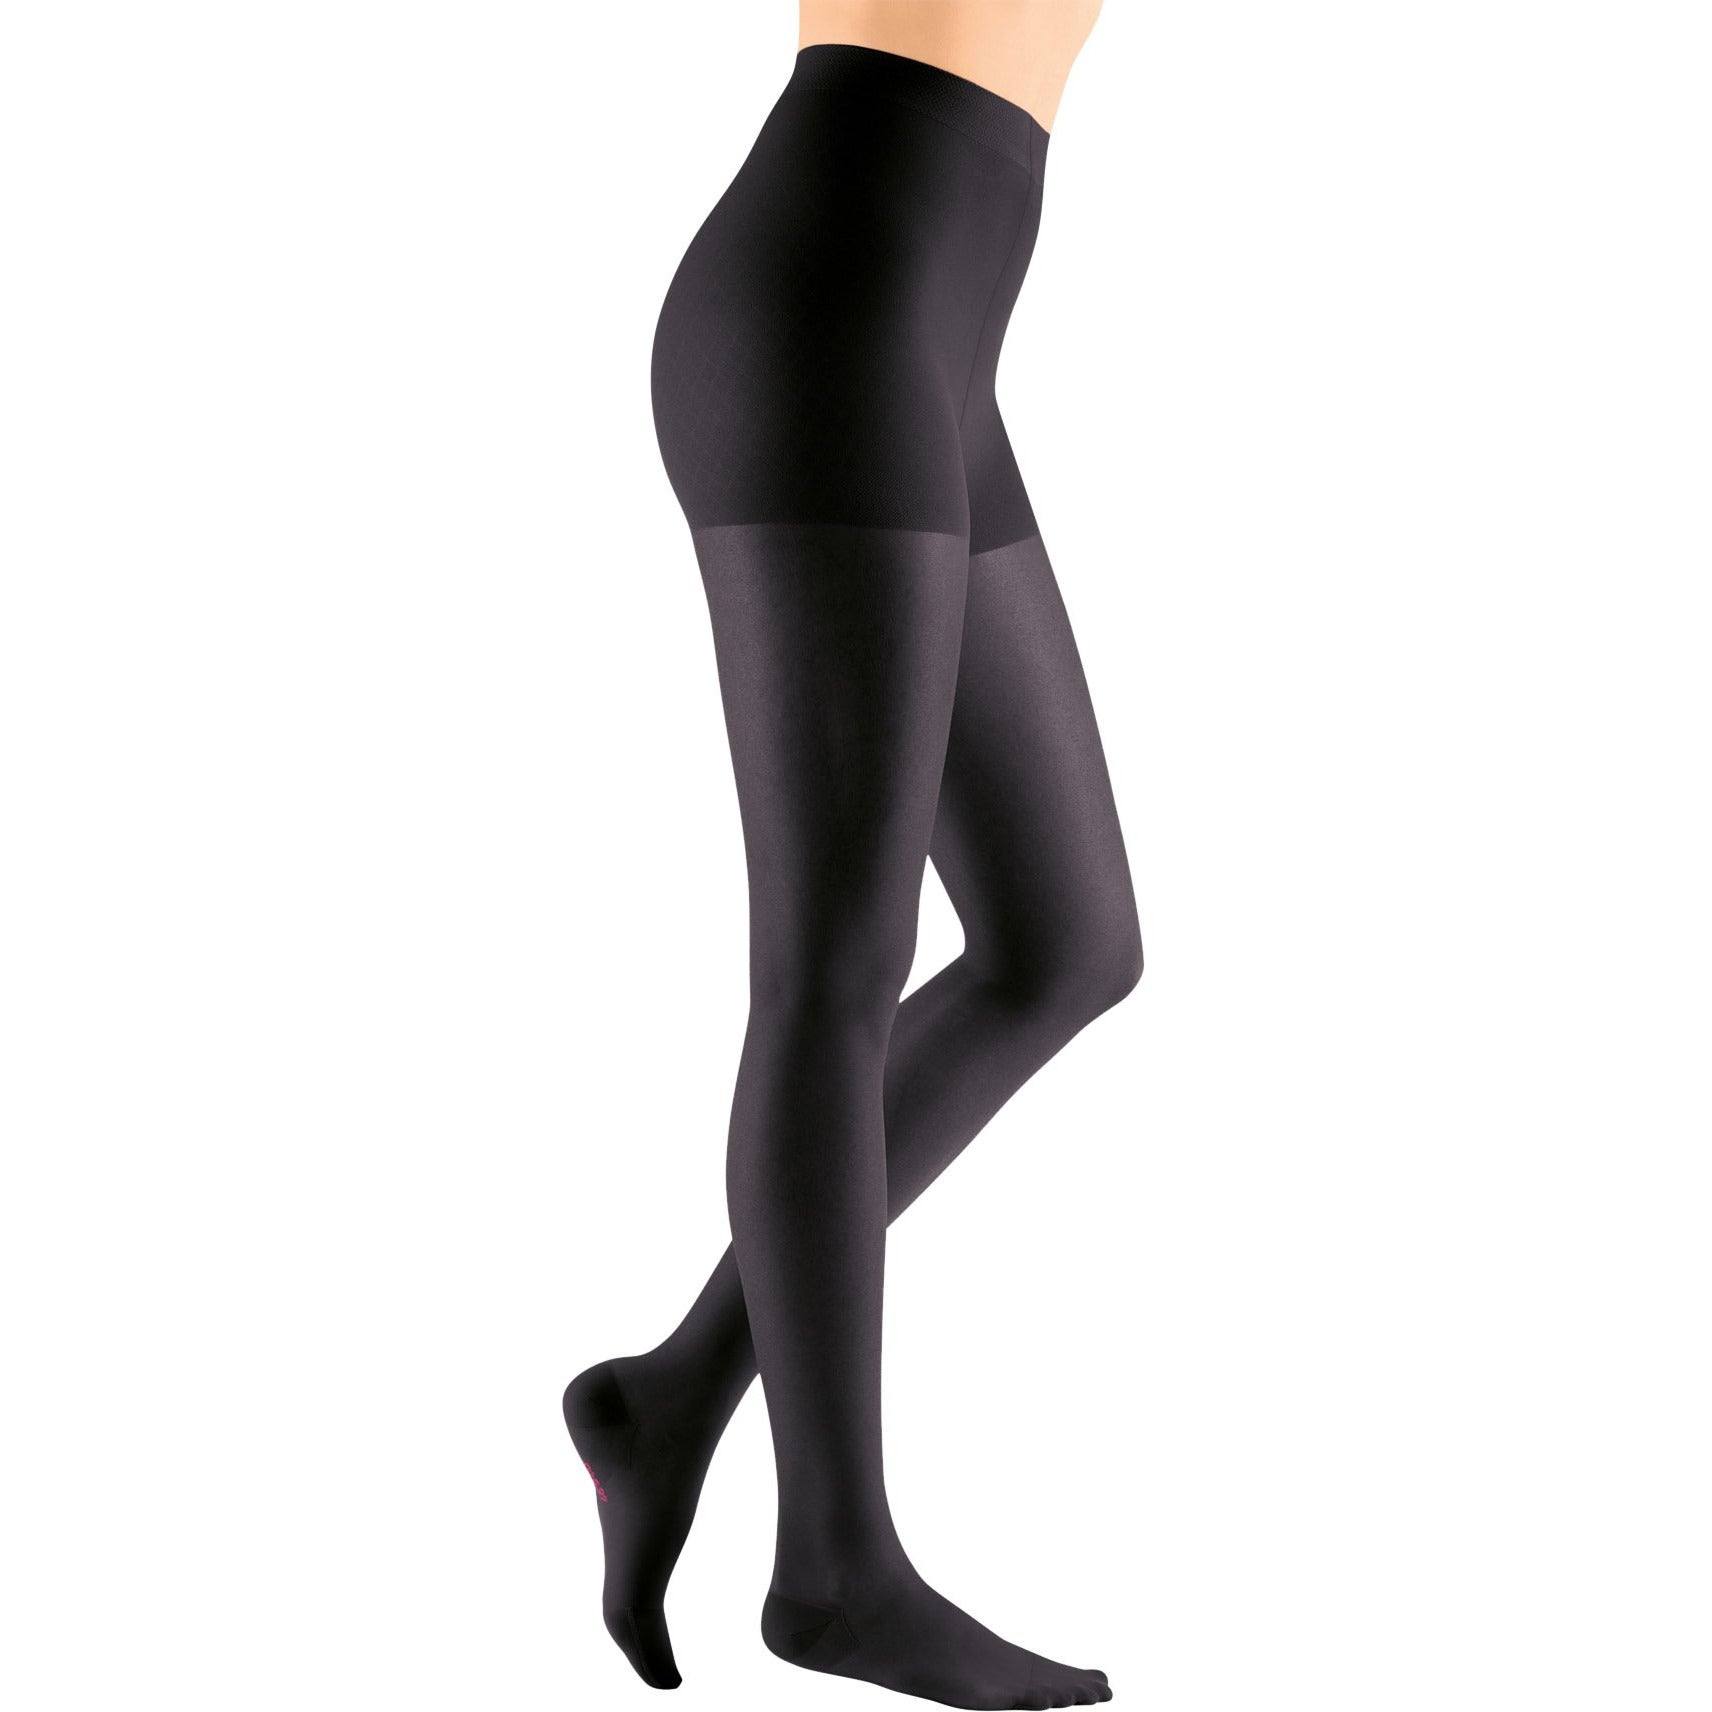 XL Opaque Graduated Compression Leggings with Control Top - 1 Pair - for  Edema, Varicose veins, Medical Stockings & Sclerotherapy, Firm Support 20-30mmHg,  Absolute Support (Black, XL) Footless A717BL4 : Amazon.in: Fashion